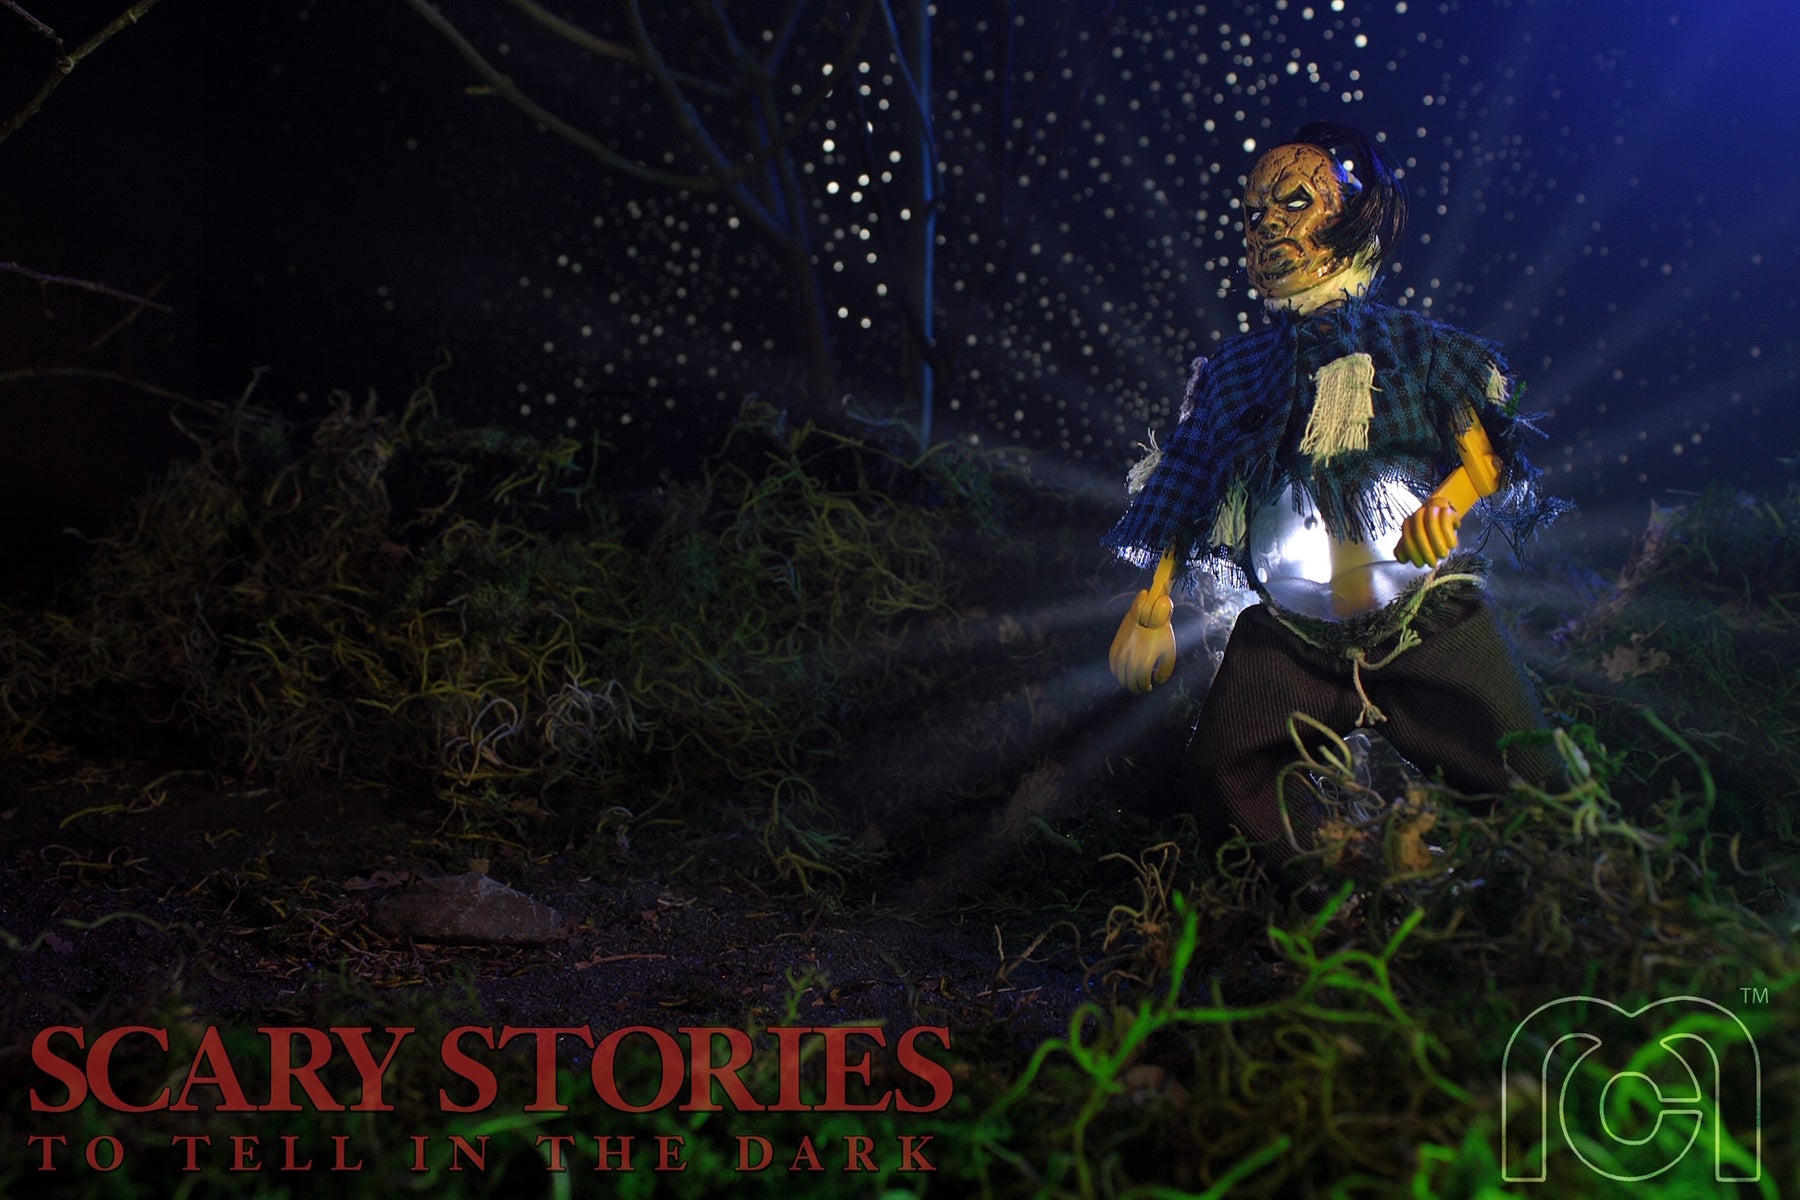 Mego Horror Wave 8 - Scary Stories to Tell in the Dark - Harold the ScareCrow - Zlc Collectibles